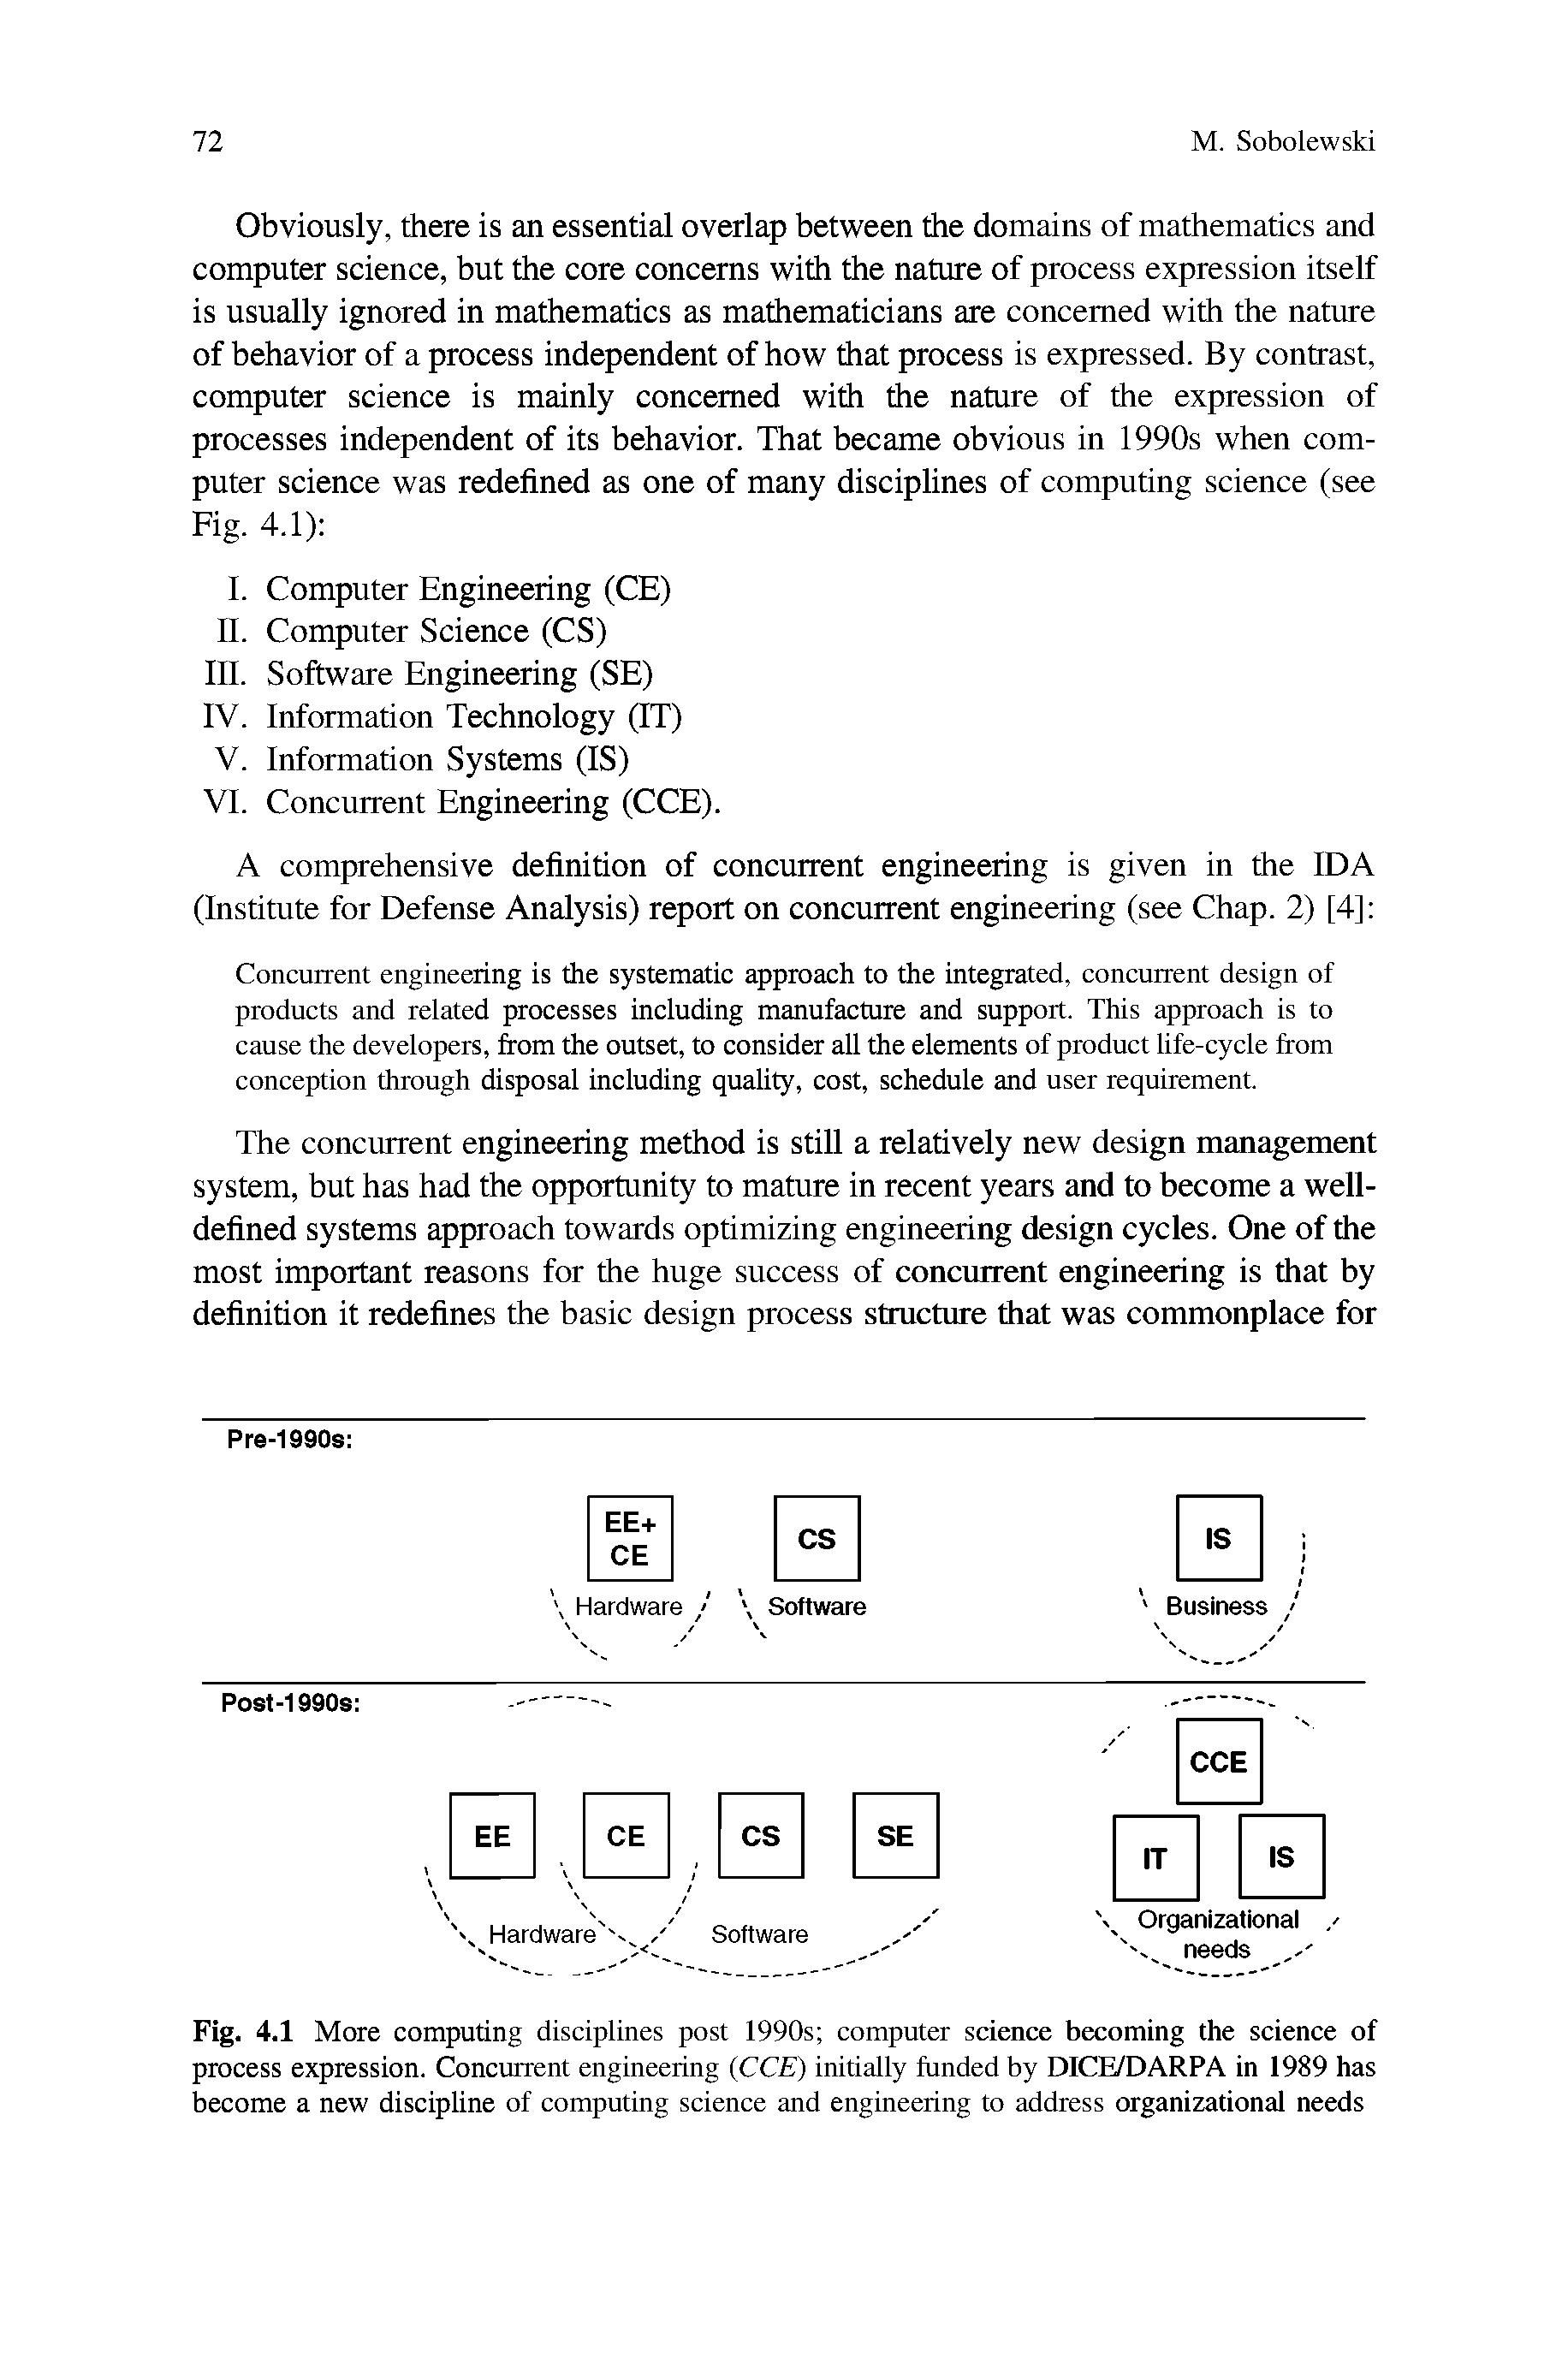 Fig. 4.1 More computing disciplines post 1990s computer science becoming the science of process expression. Concurrent engineering (CCE) initially funded by DICE/DARPA in 1989 has become a new discipline of computing science and engineering to address organizational needs...